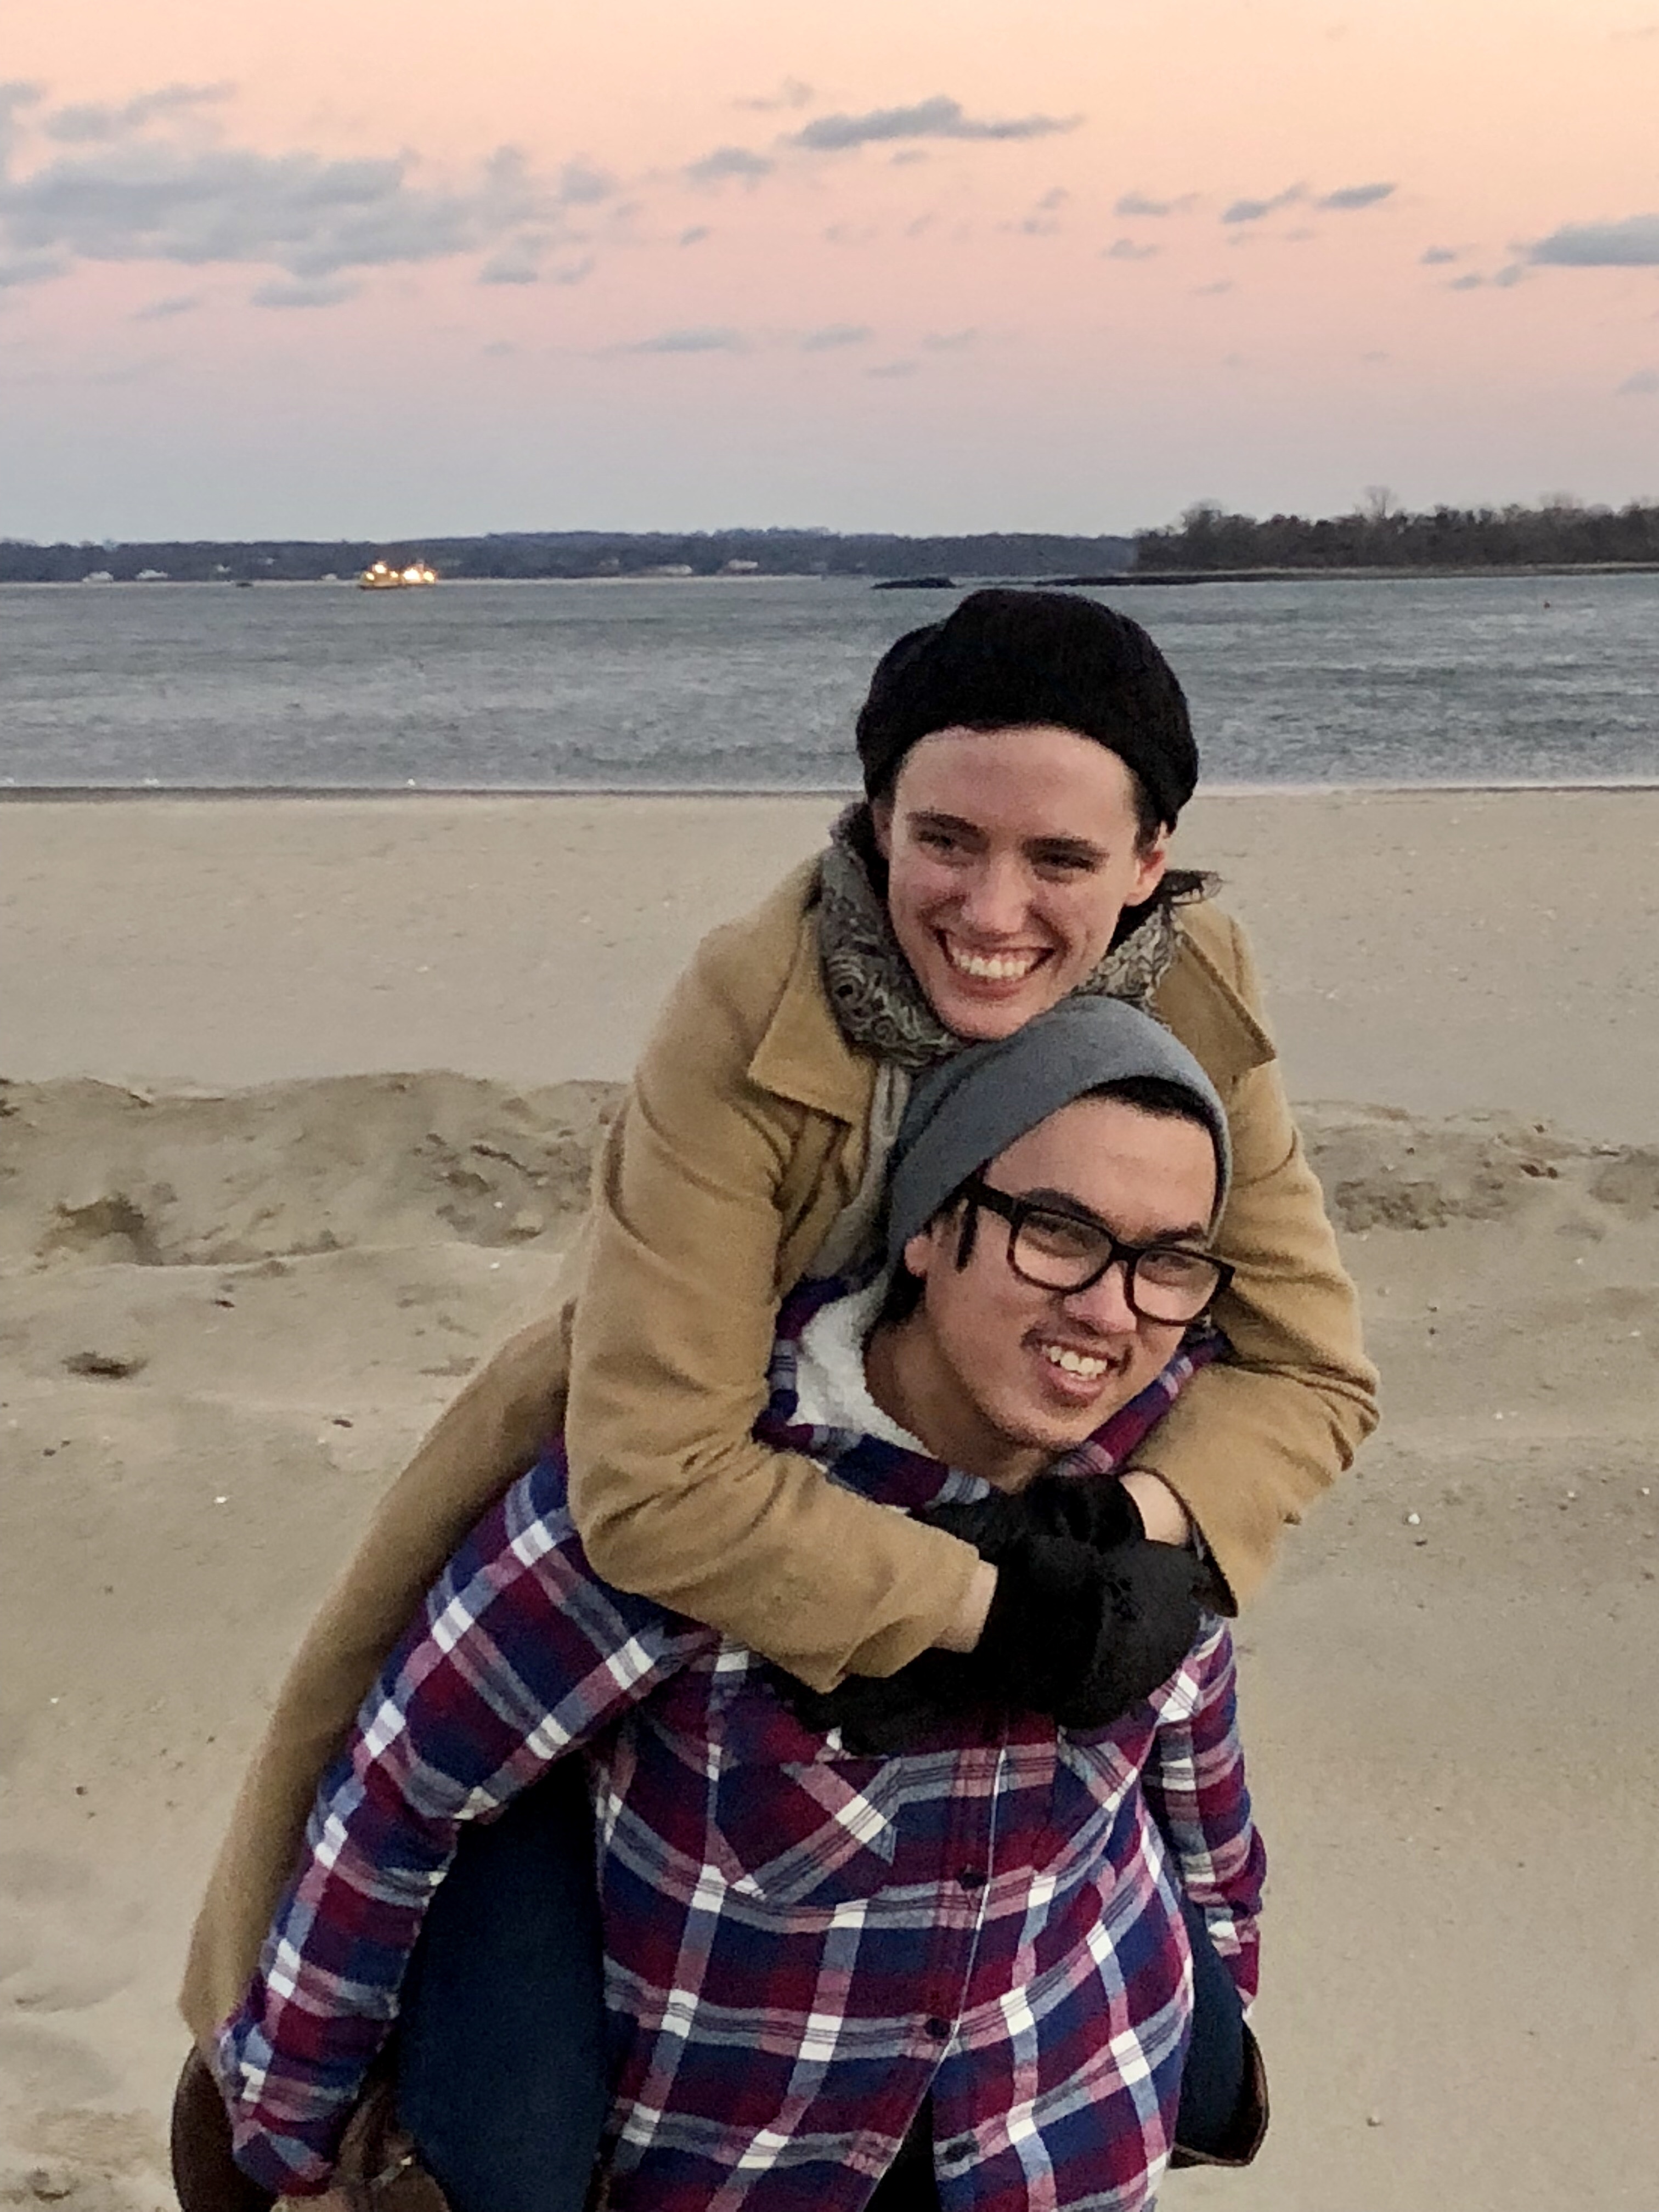 Tori (the author) clinging onto her husband’s (Johnny) back as he carries her over the sand at orchard beach in the Bronx. The sun is setting over the water, the sky is pink. They are both wearing coats and hats. Both are grinning and looking away from the camera in opposite directions. 